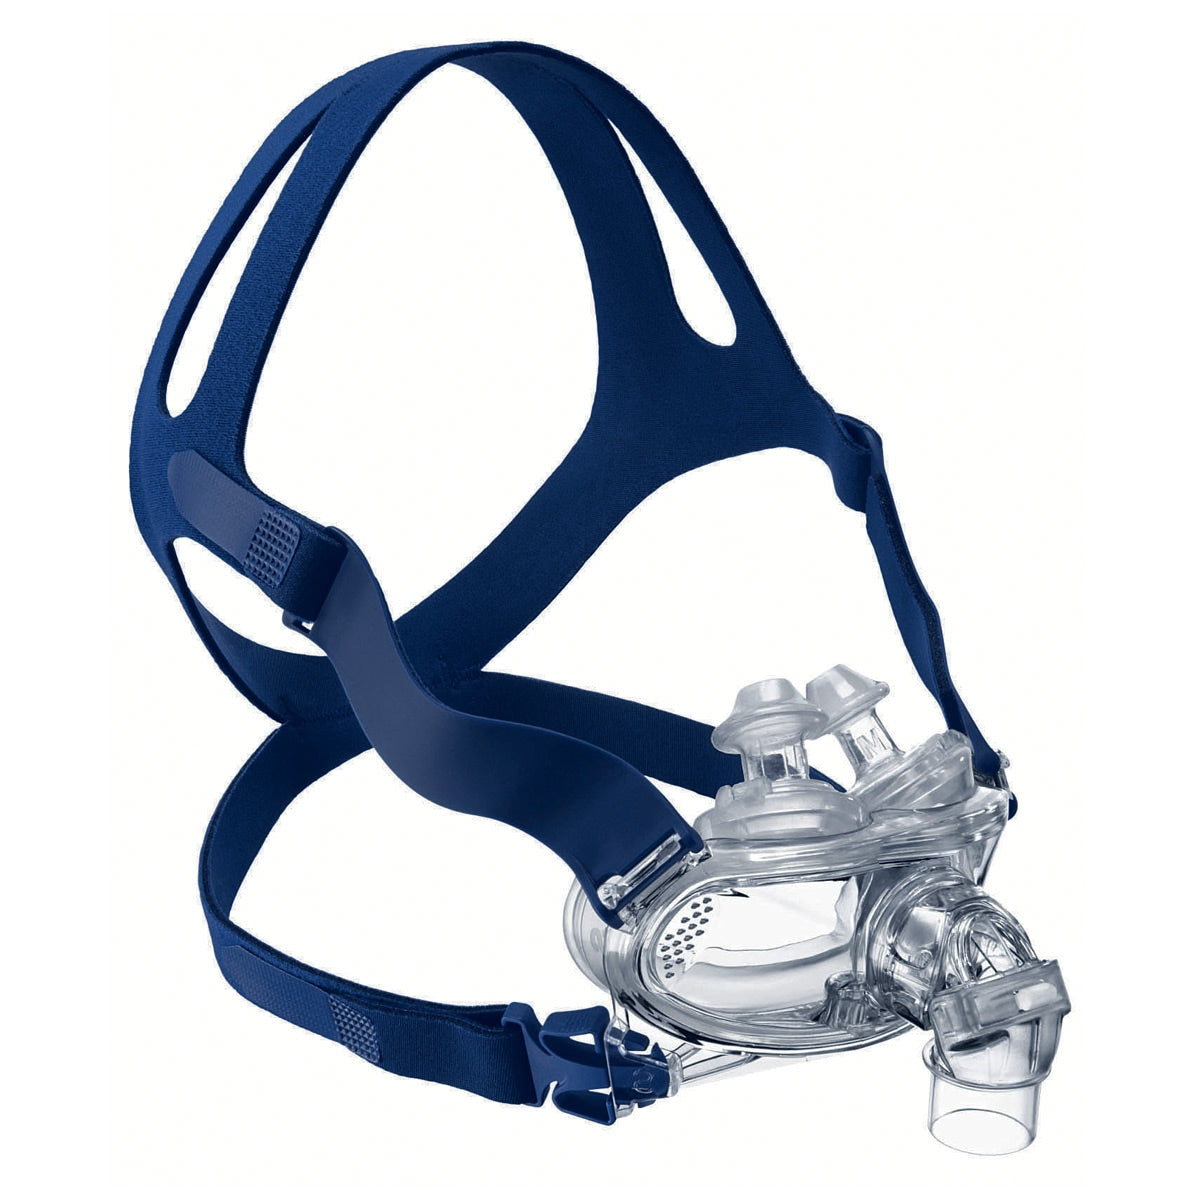 Mirage Liberty Mask Pack with Nasal Pillows - DISCONTINUED